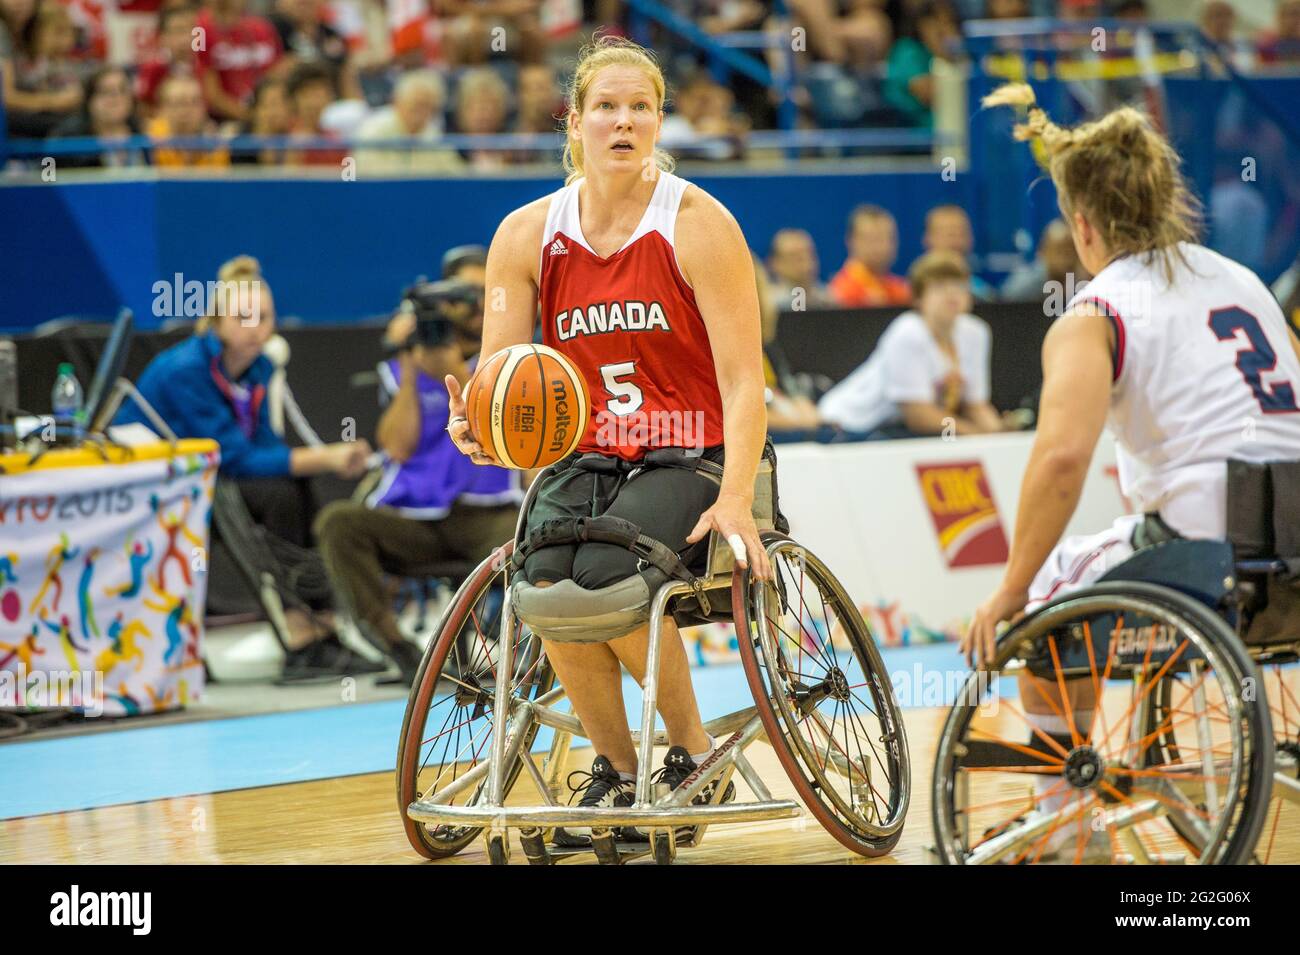 USA team beat team Canada in the finals of women's wheelchair basketball during the Parapan Am Games in Toronto 2015 Stock Photo